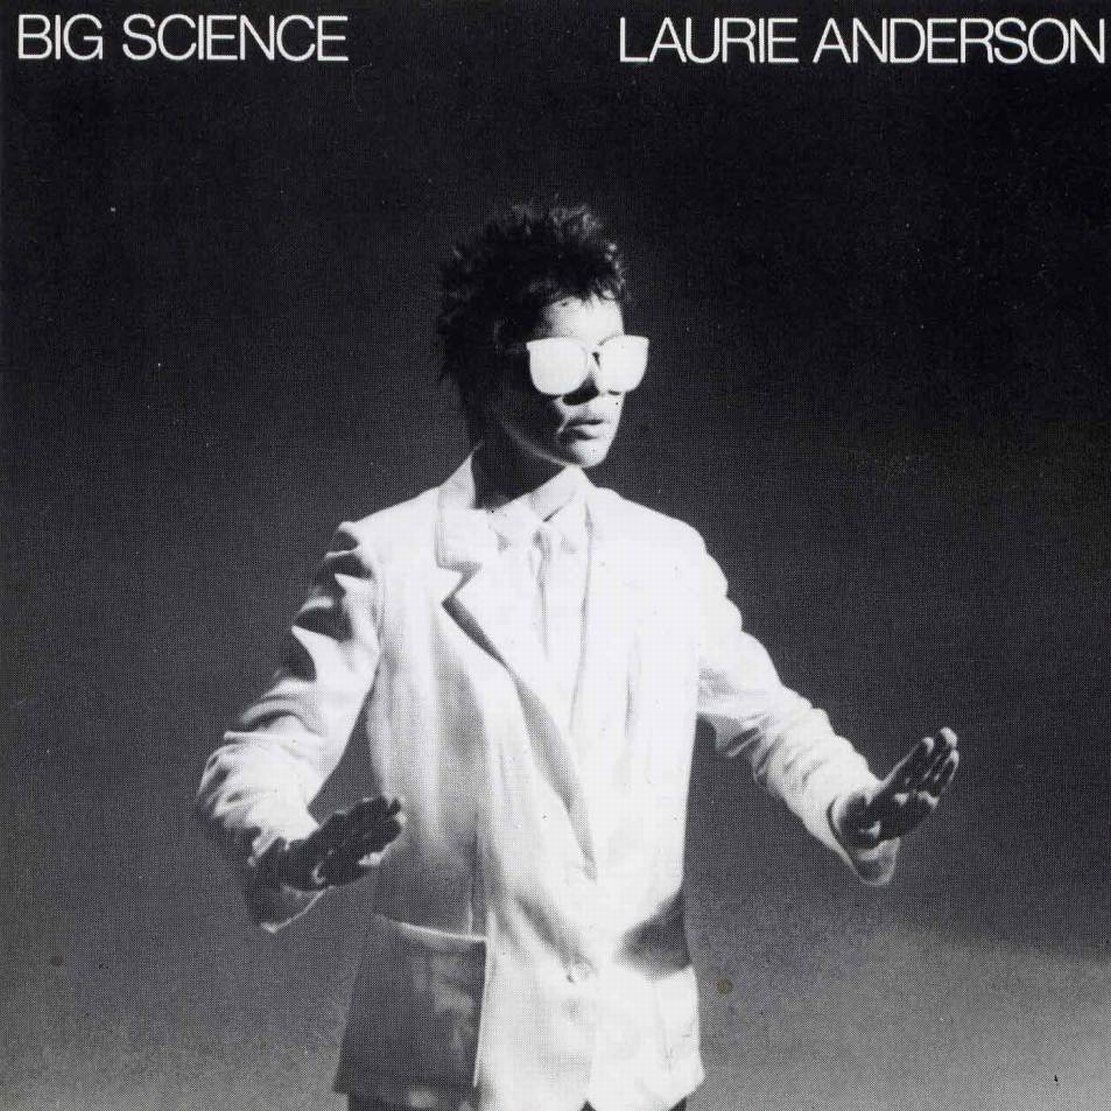 Big Science - Laurie Anderson